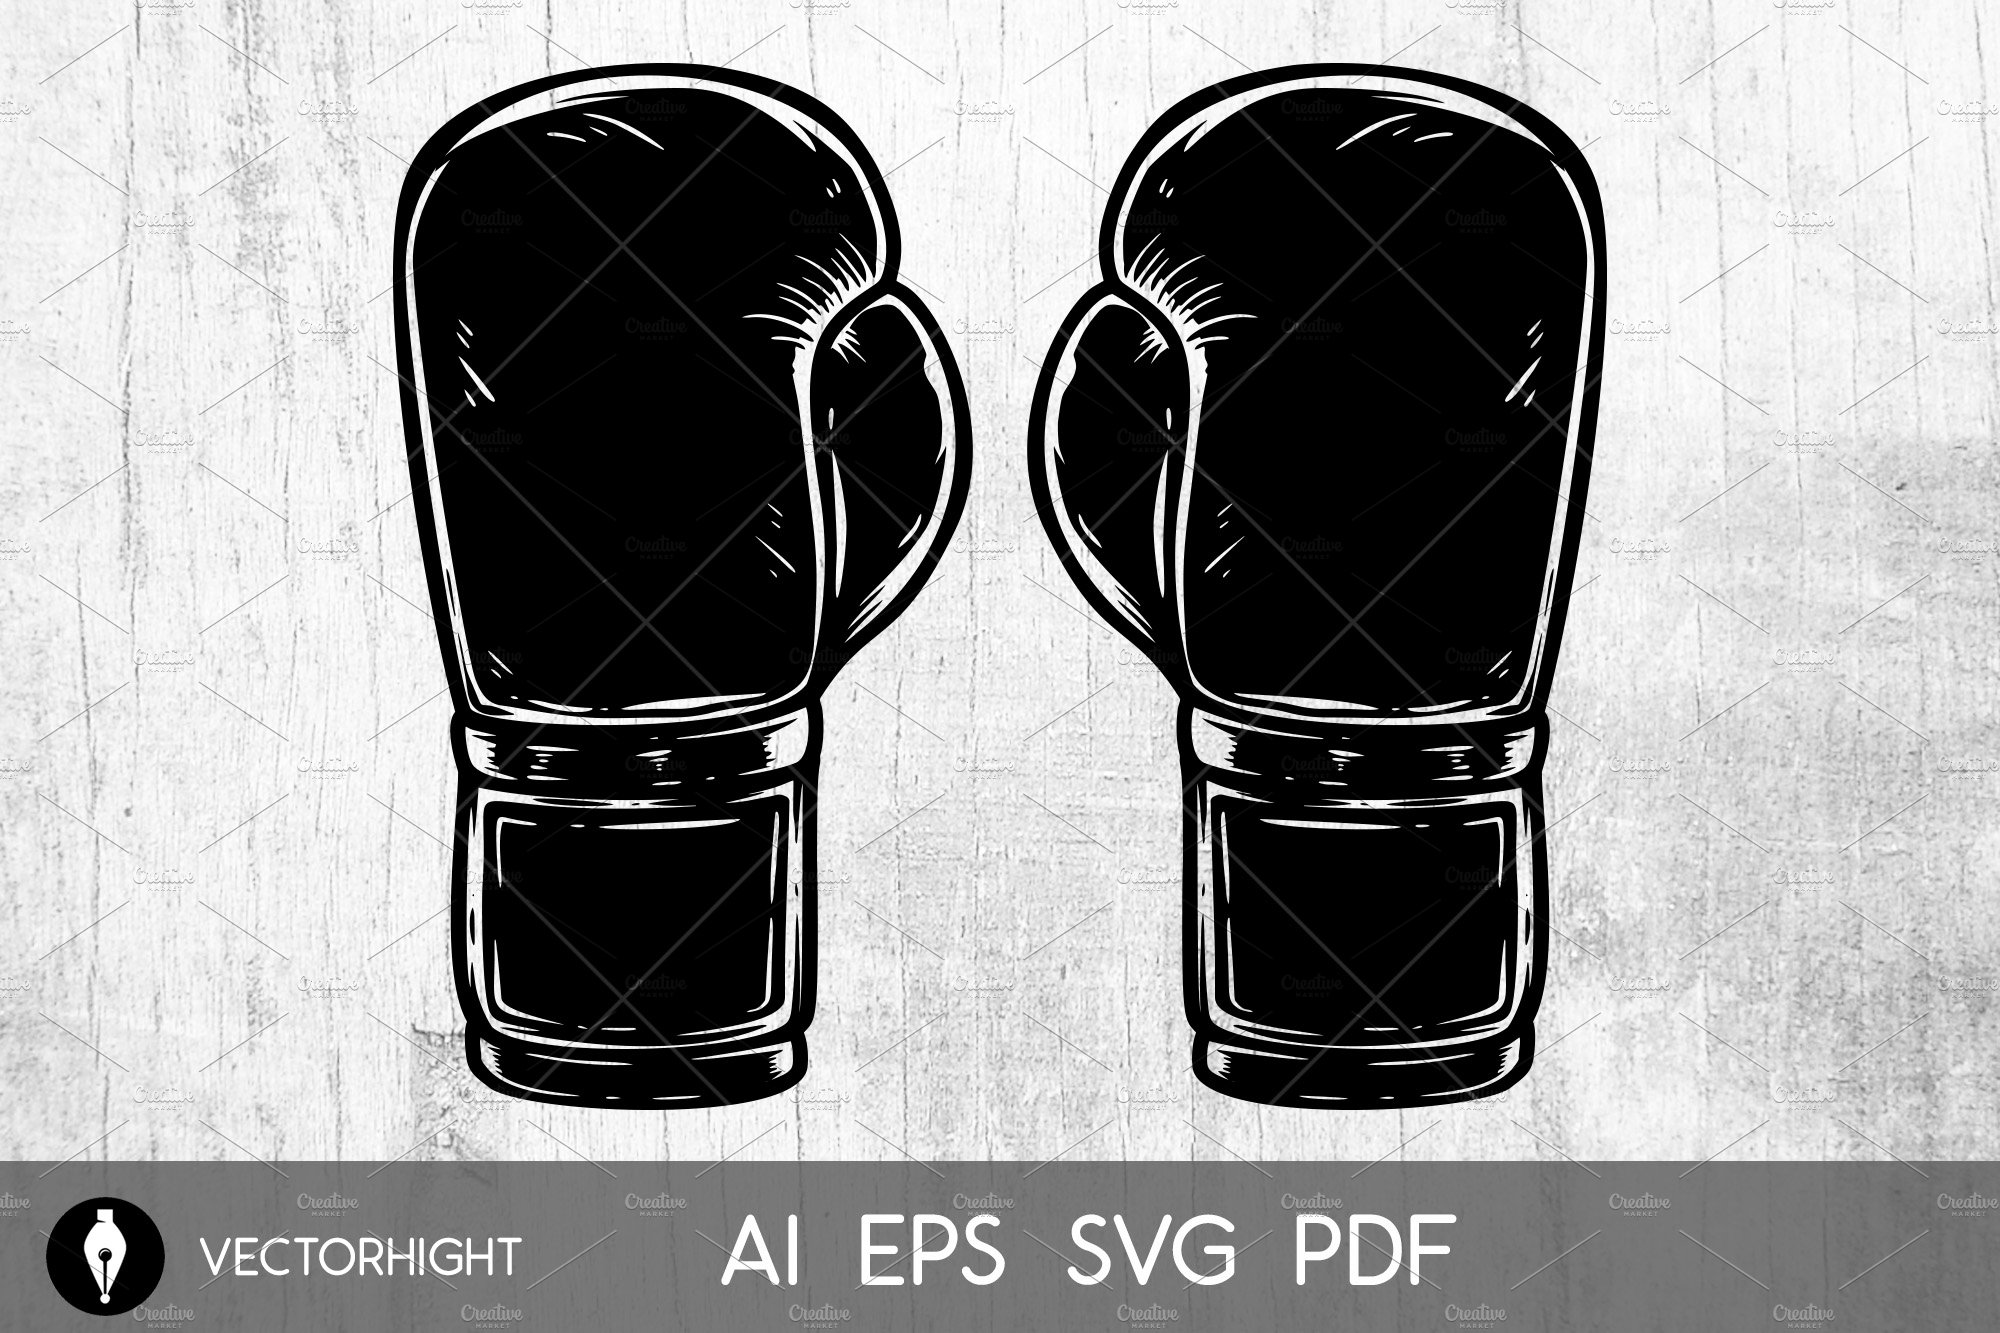 Illustration of boxing gloves cover image.